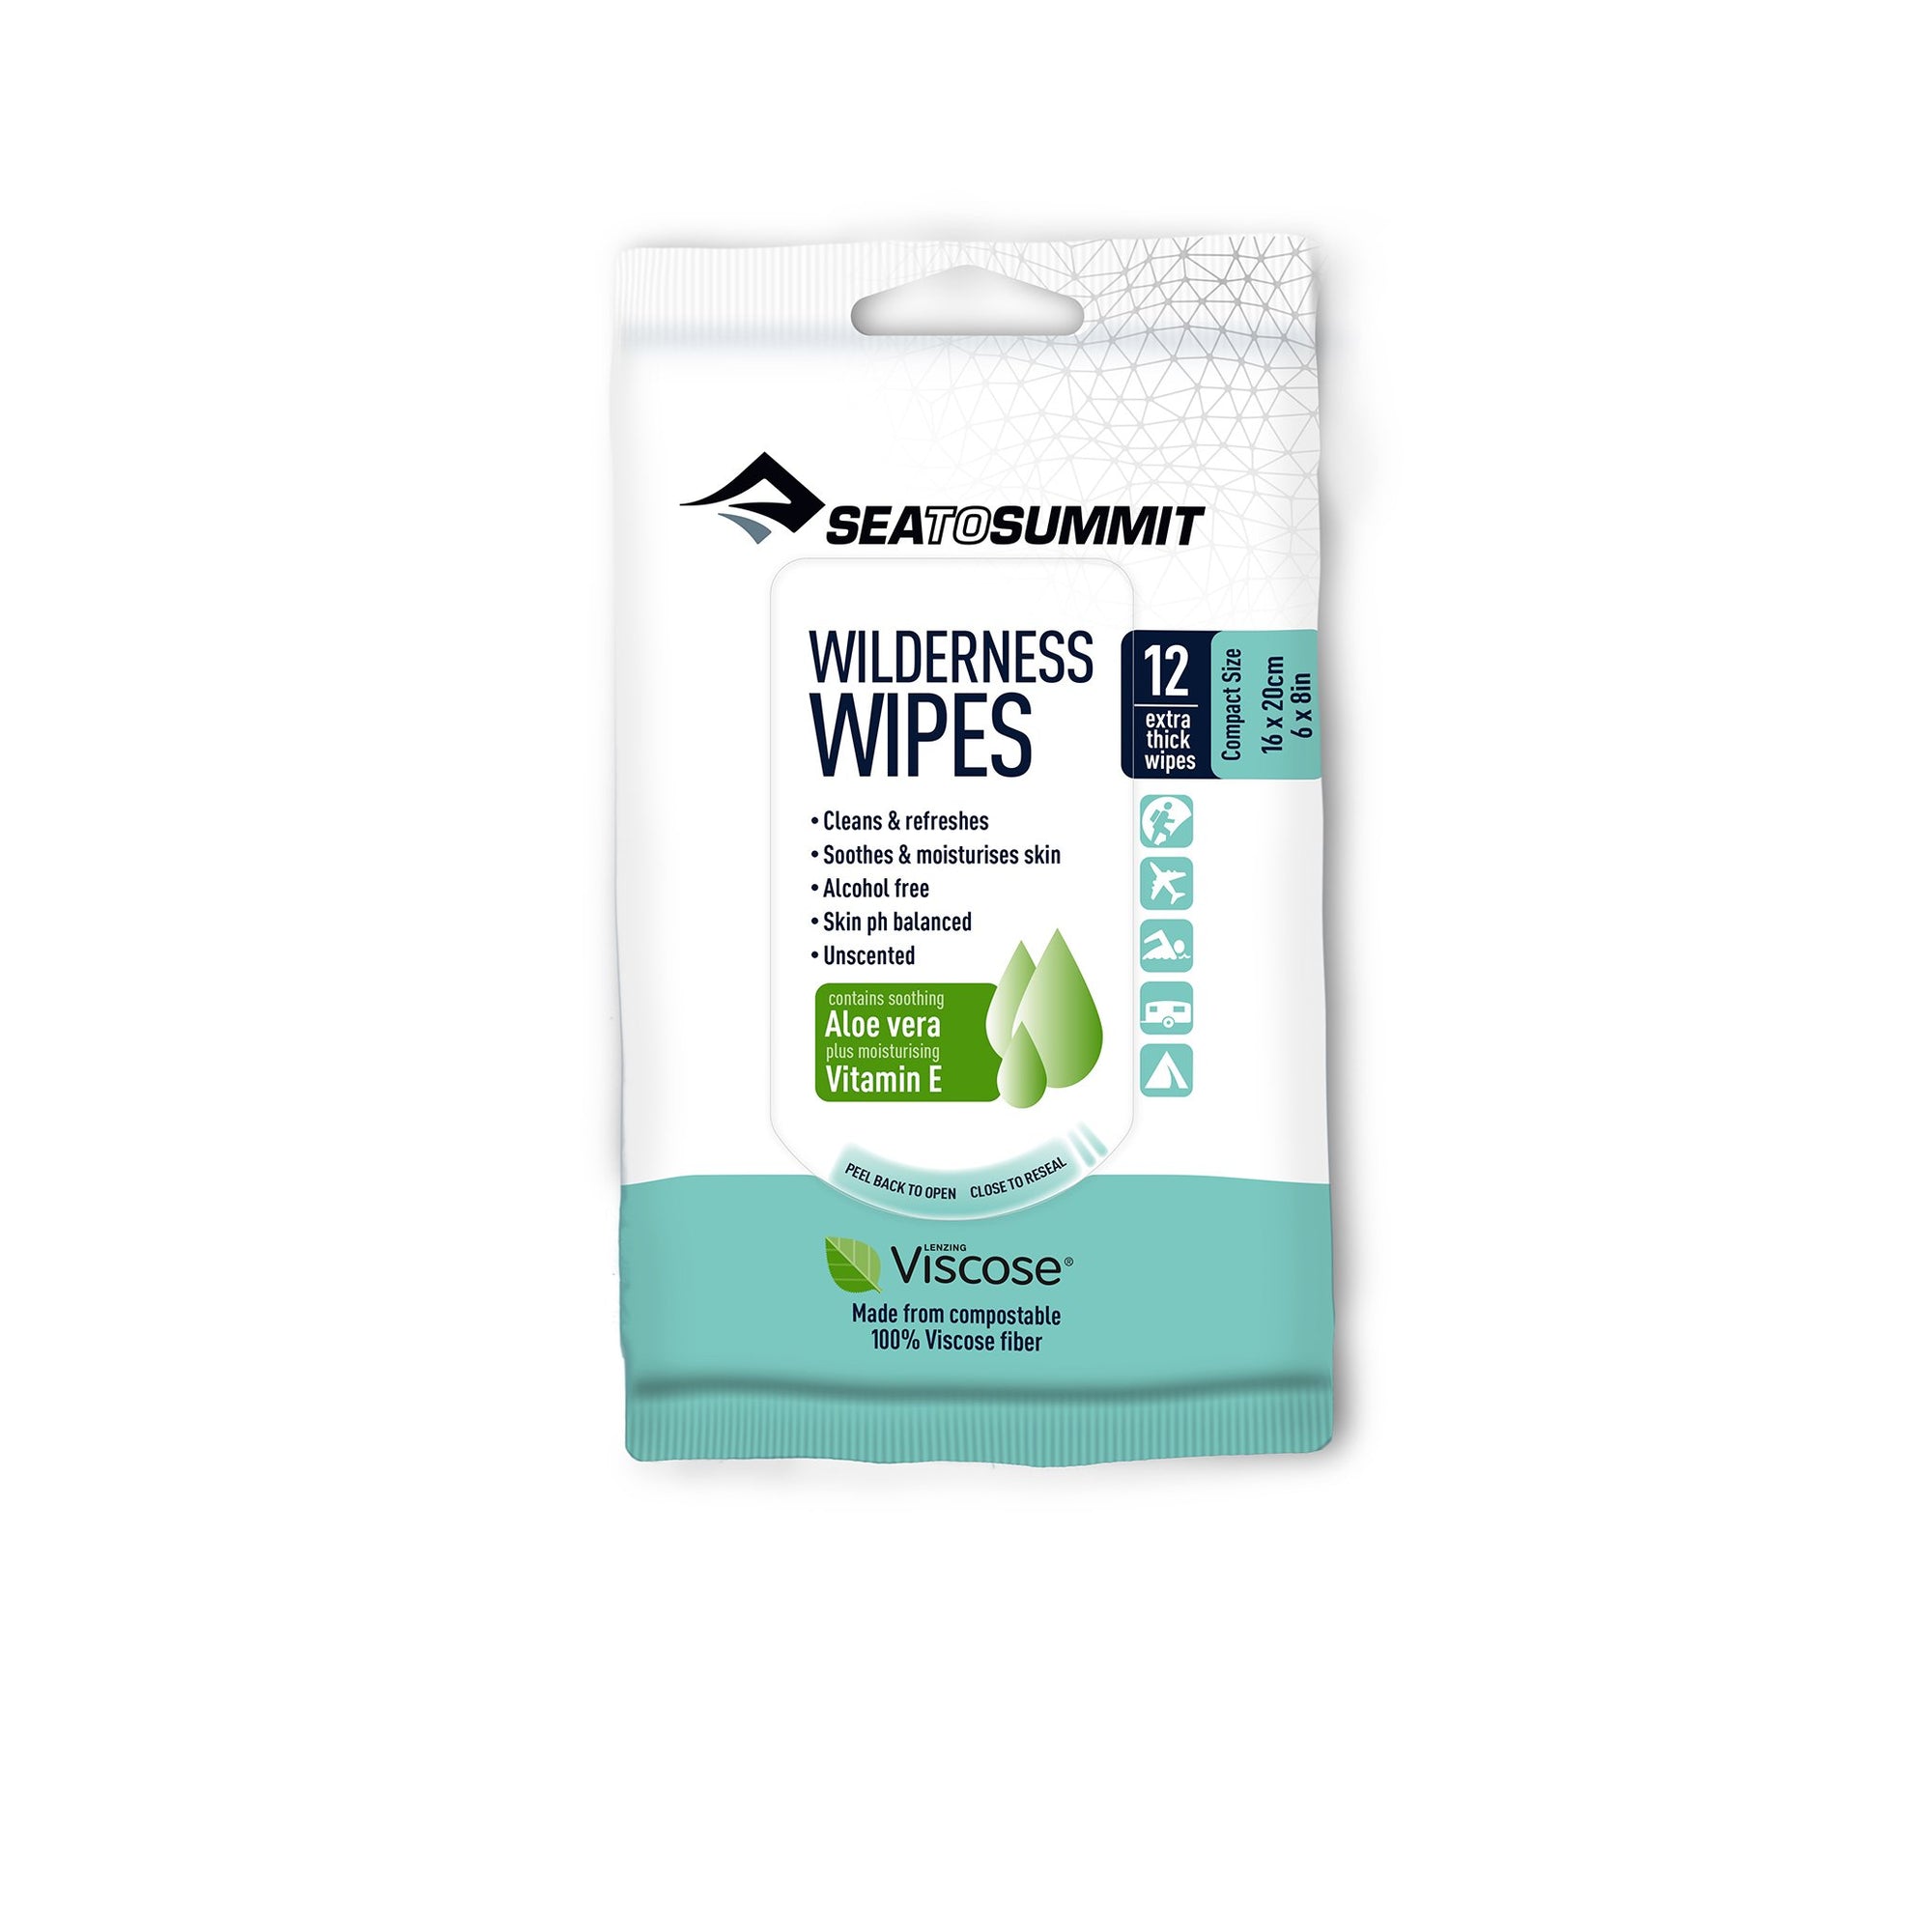 Sea to Summit Trek and Travel Wilderness Wipes - Compact